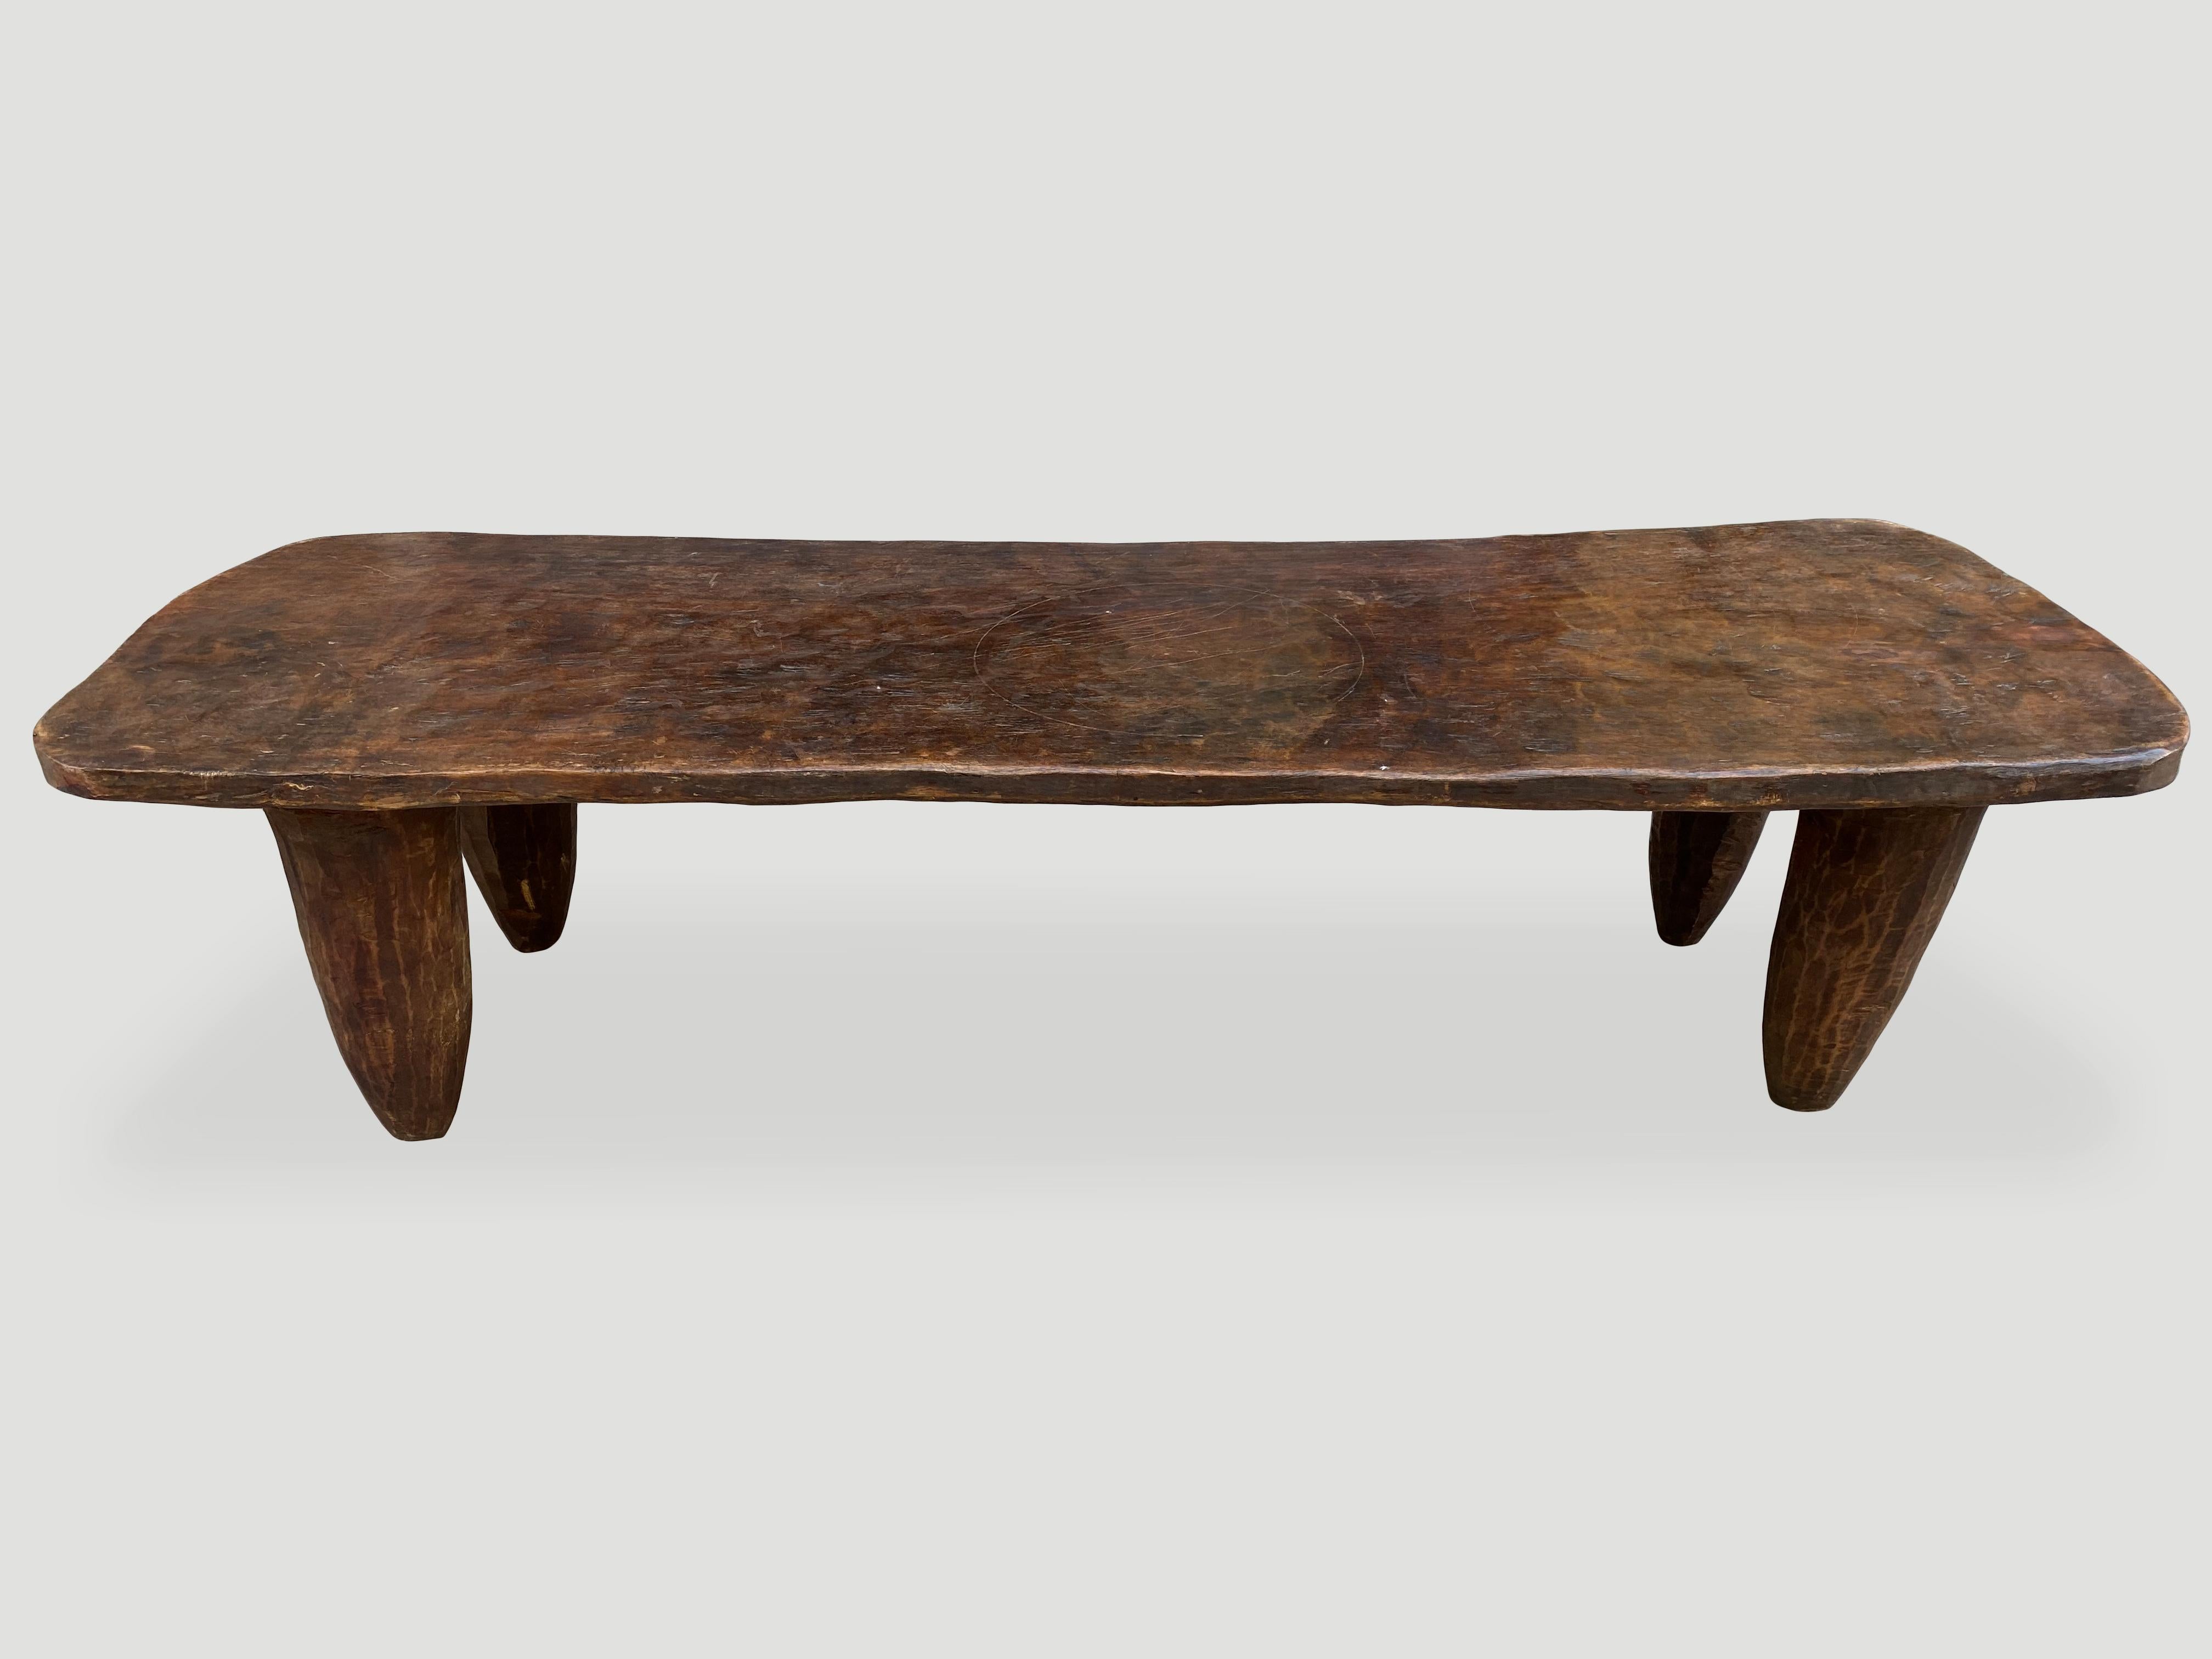 Ivorian Andrianna Shamaris Rare Cote d’Ivoire Senufo Coffee Table, Bench or Bed